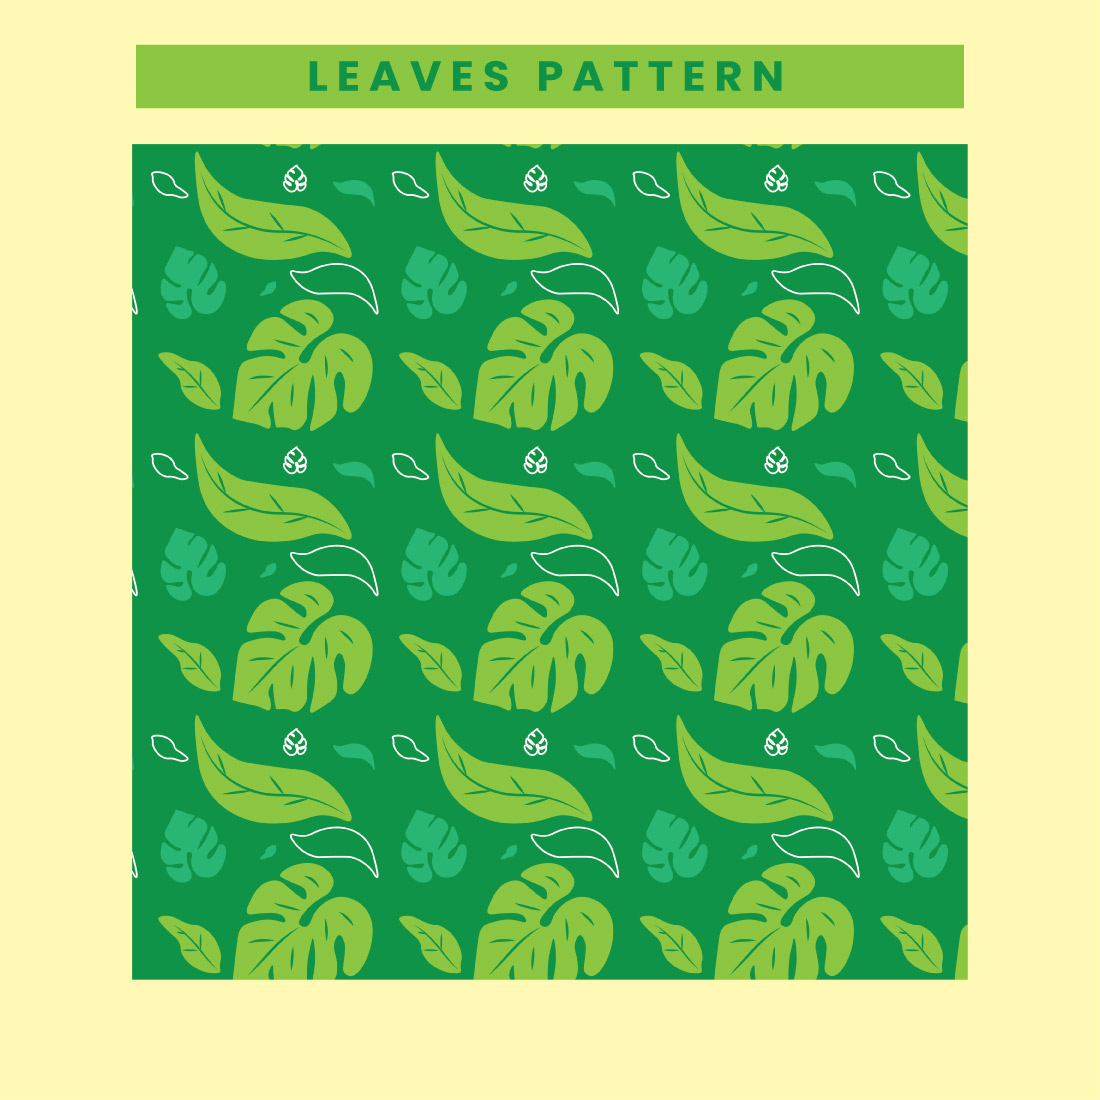 Leaves Pattern cover image.